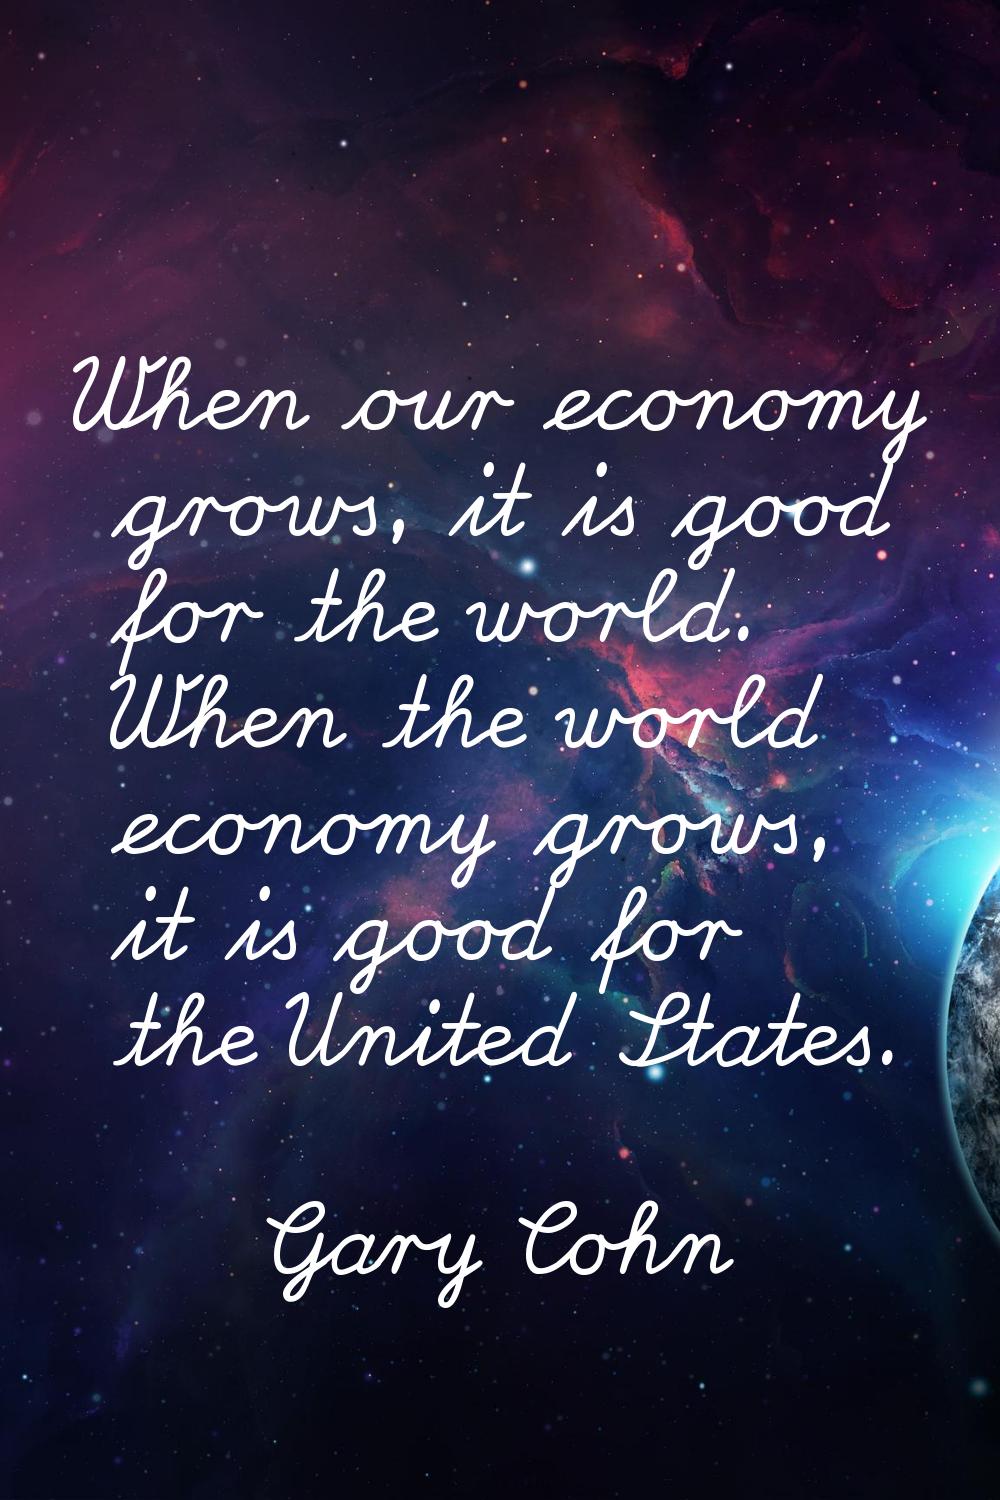 When our economy grows, it is good for the world. When the world economy grows, it is good for the 